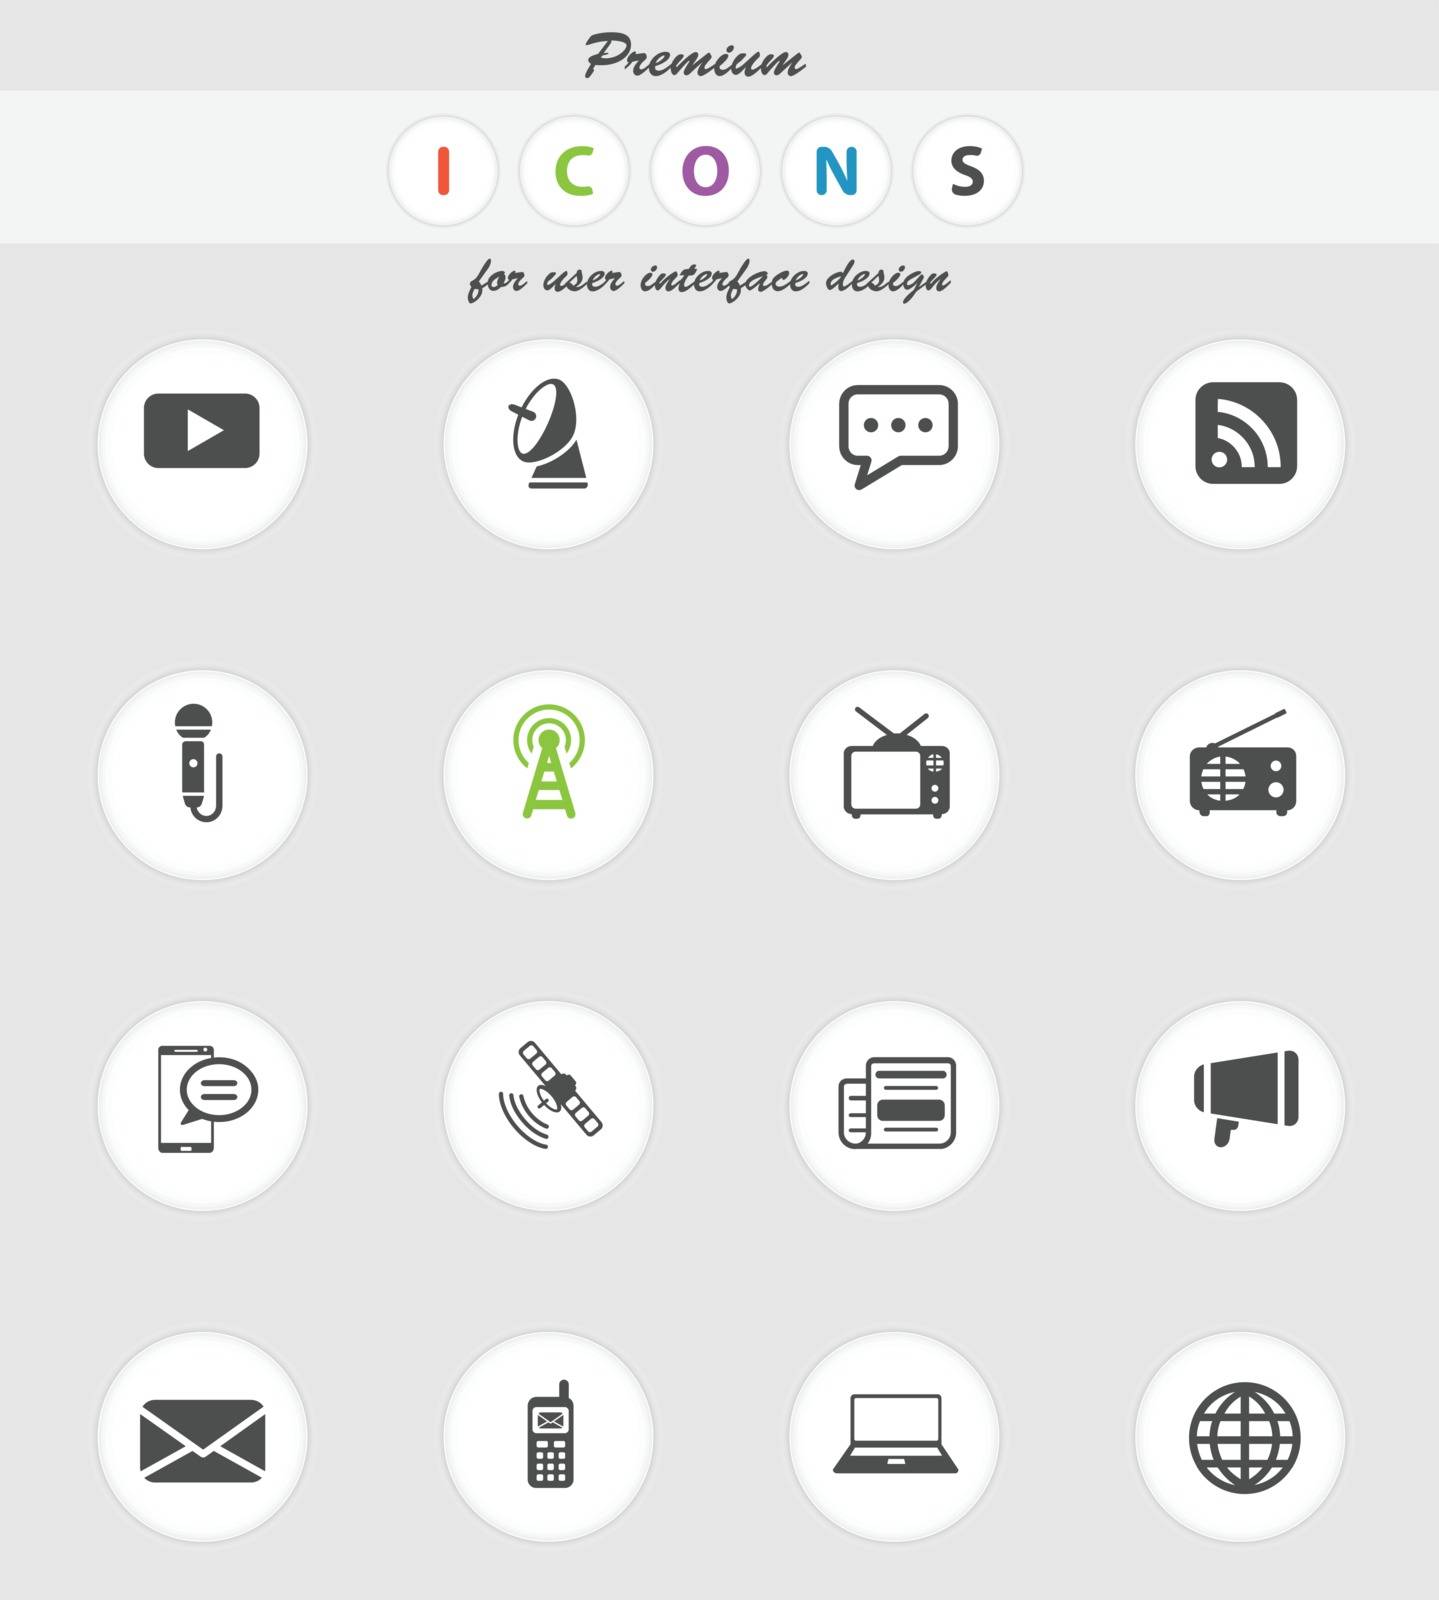 Media simply icons by ayax